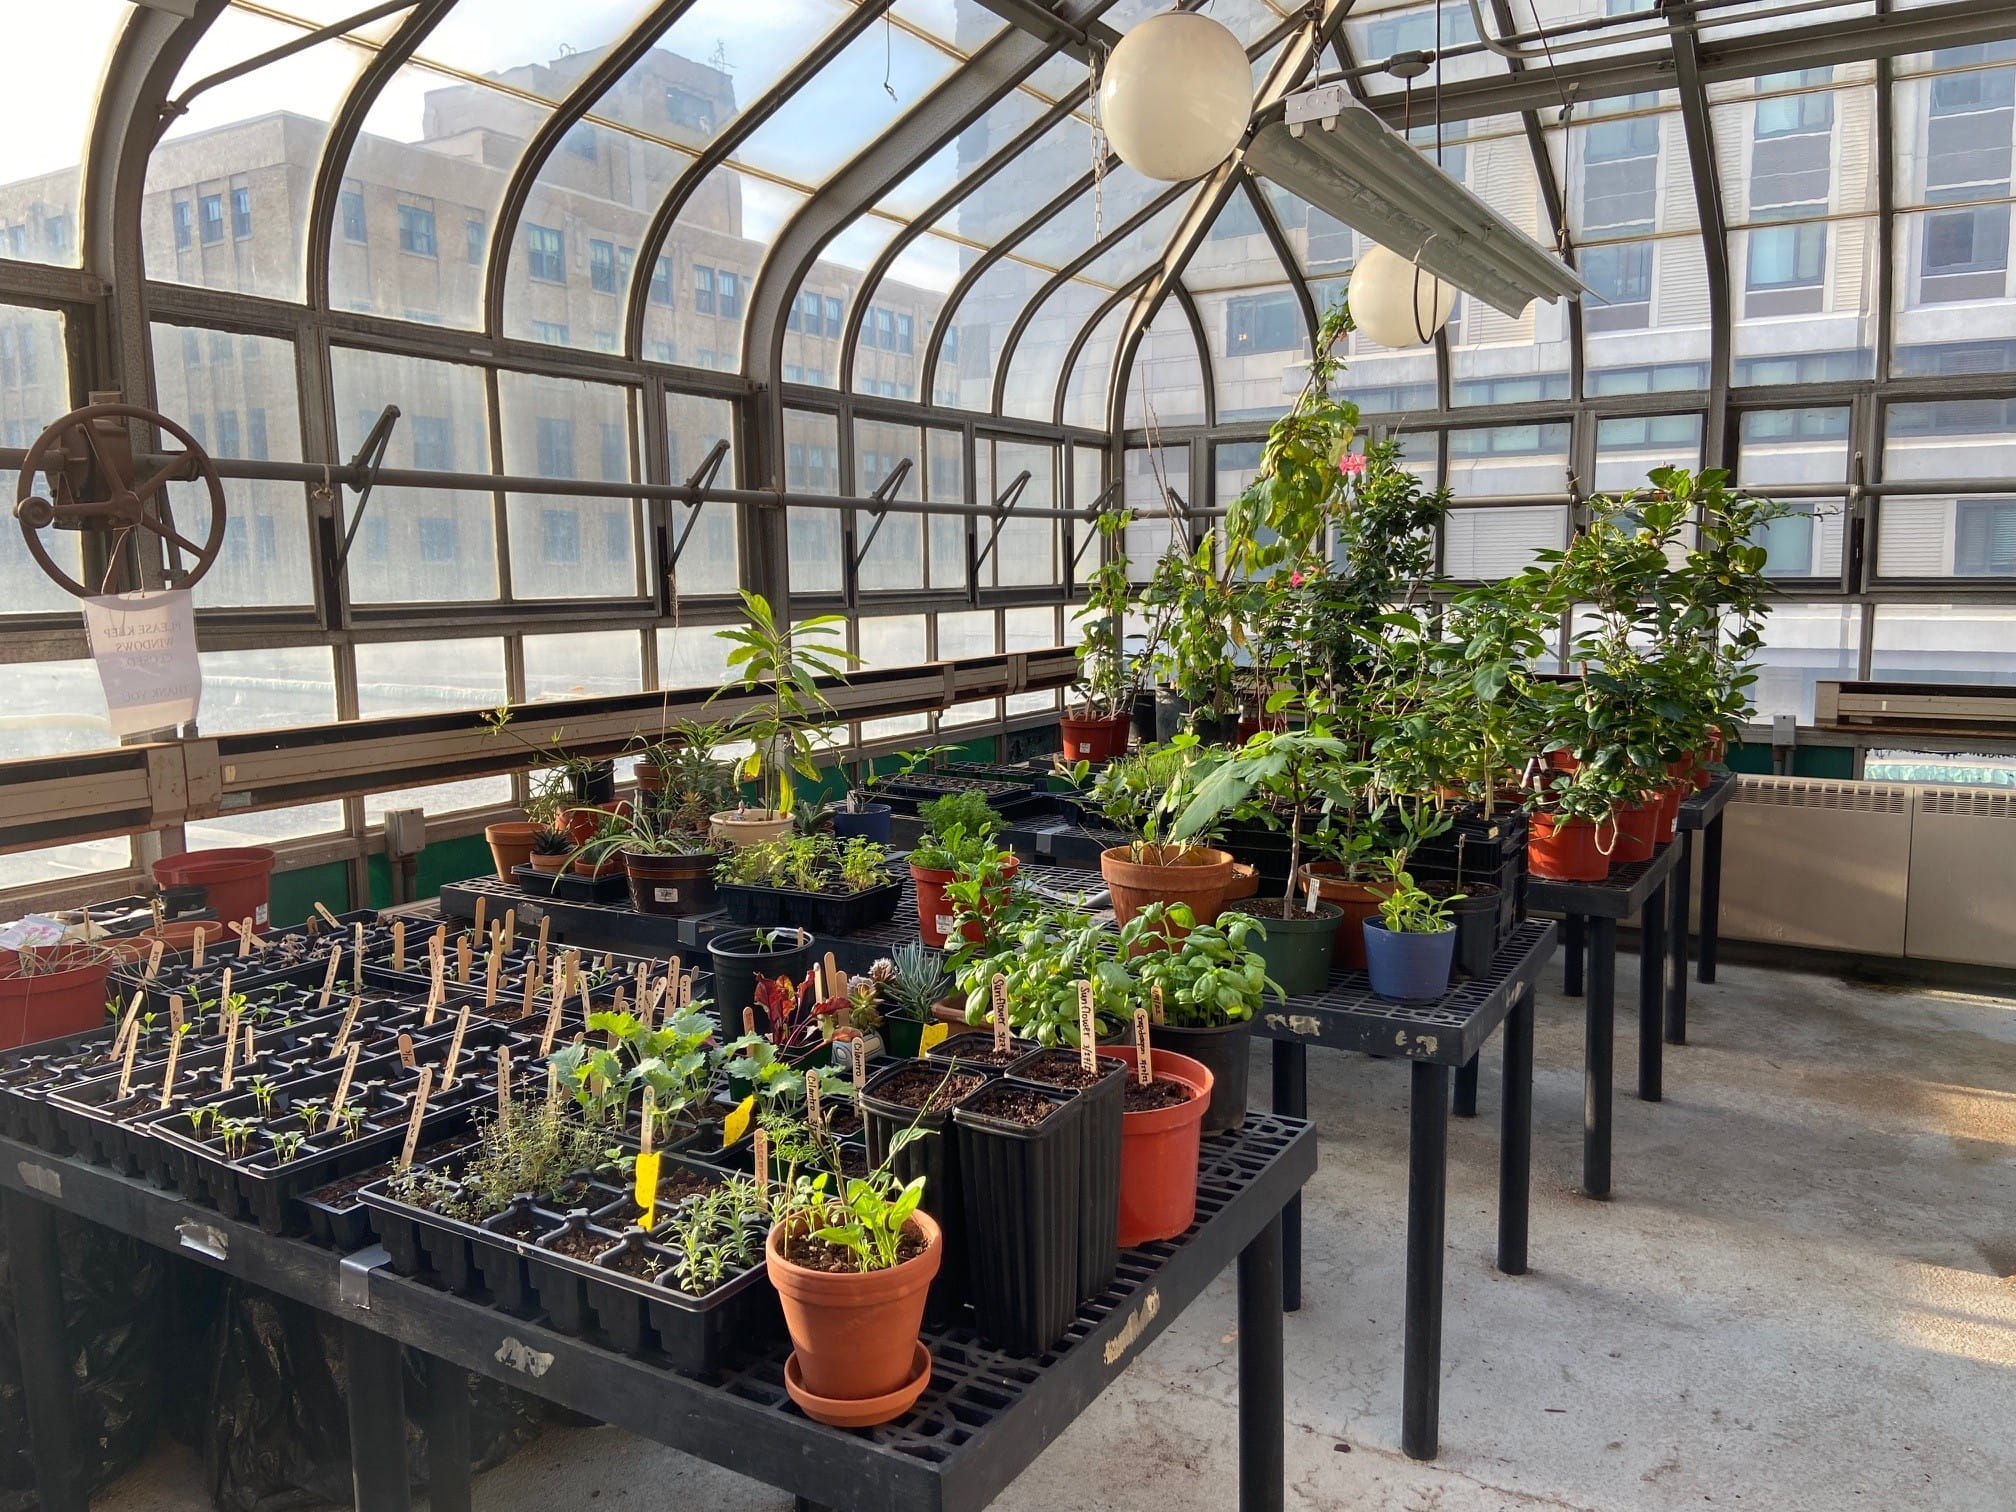 An image of the Stratton Greenhouse with plants on a table.